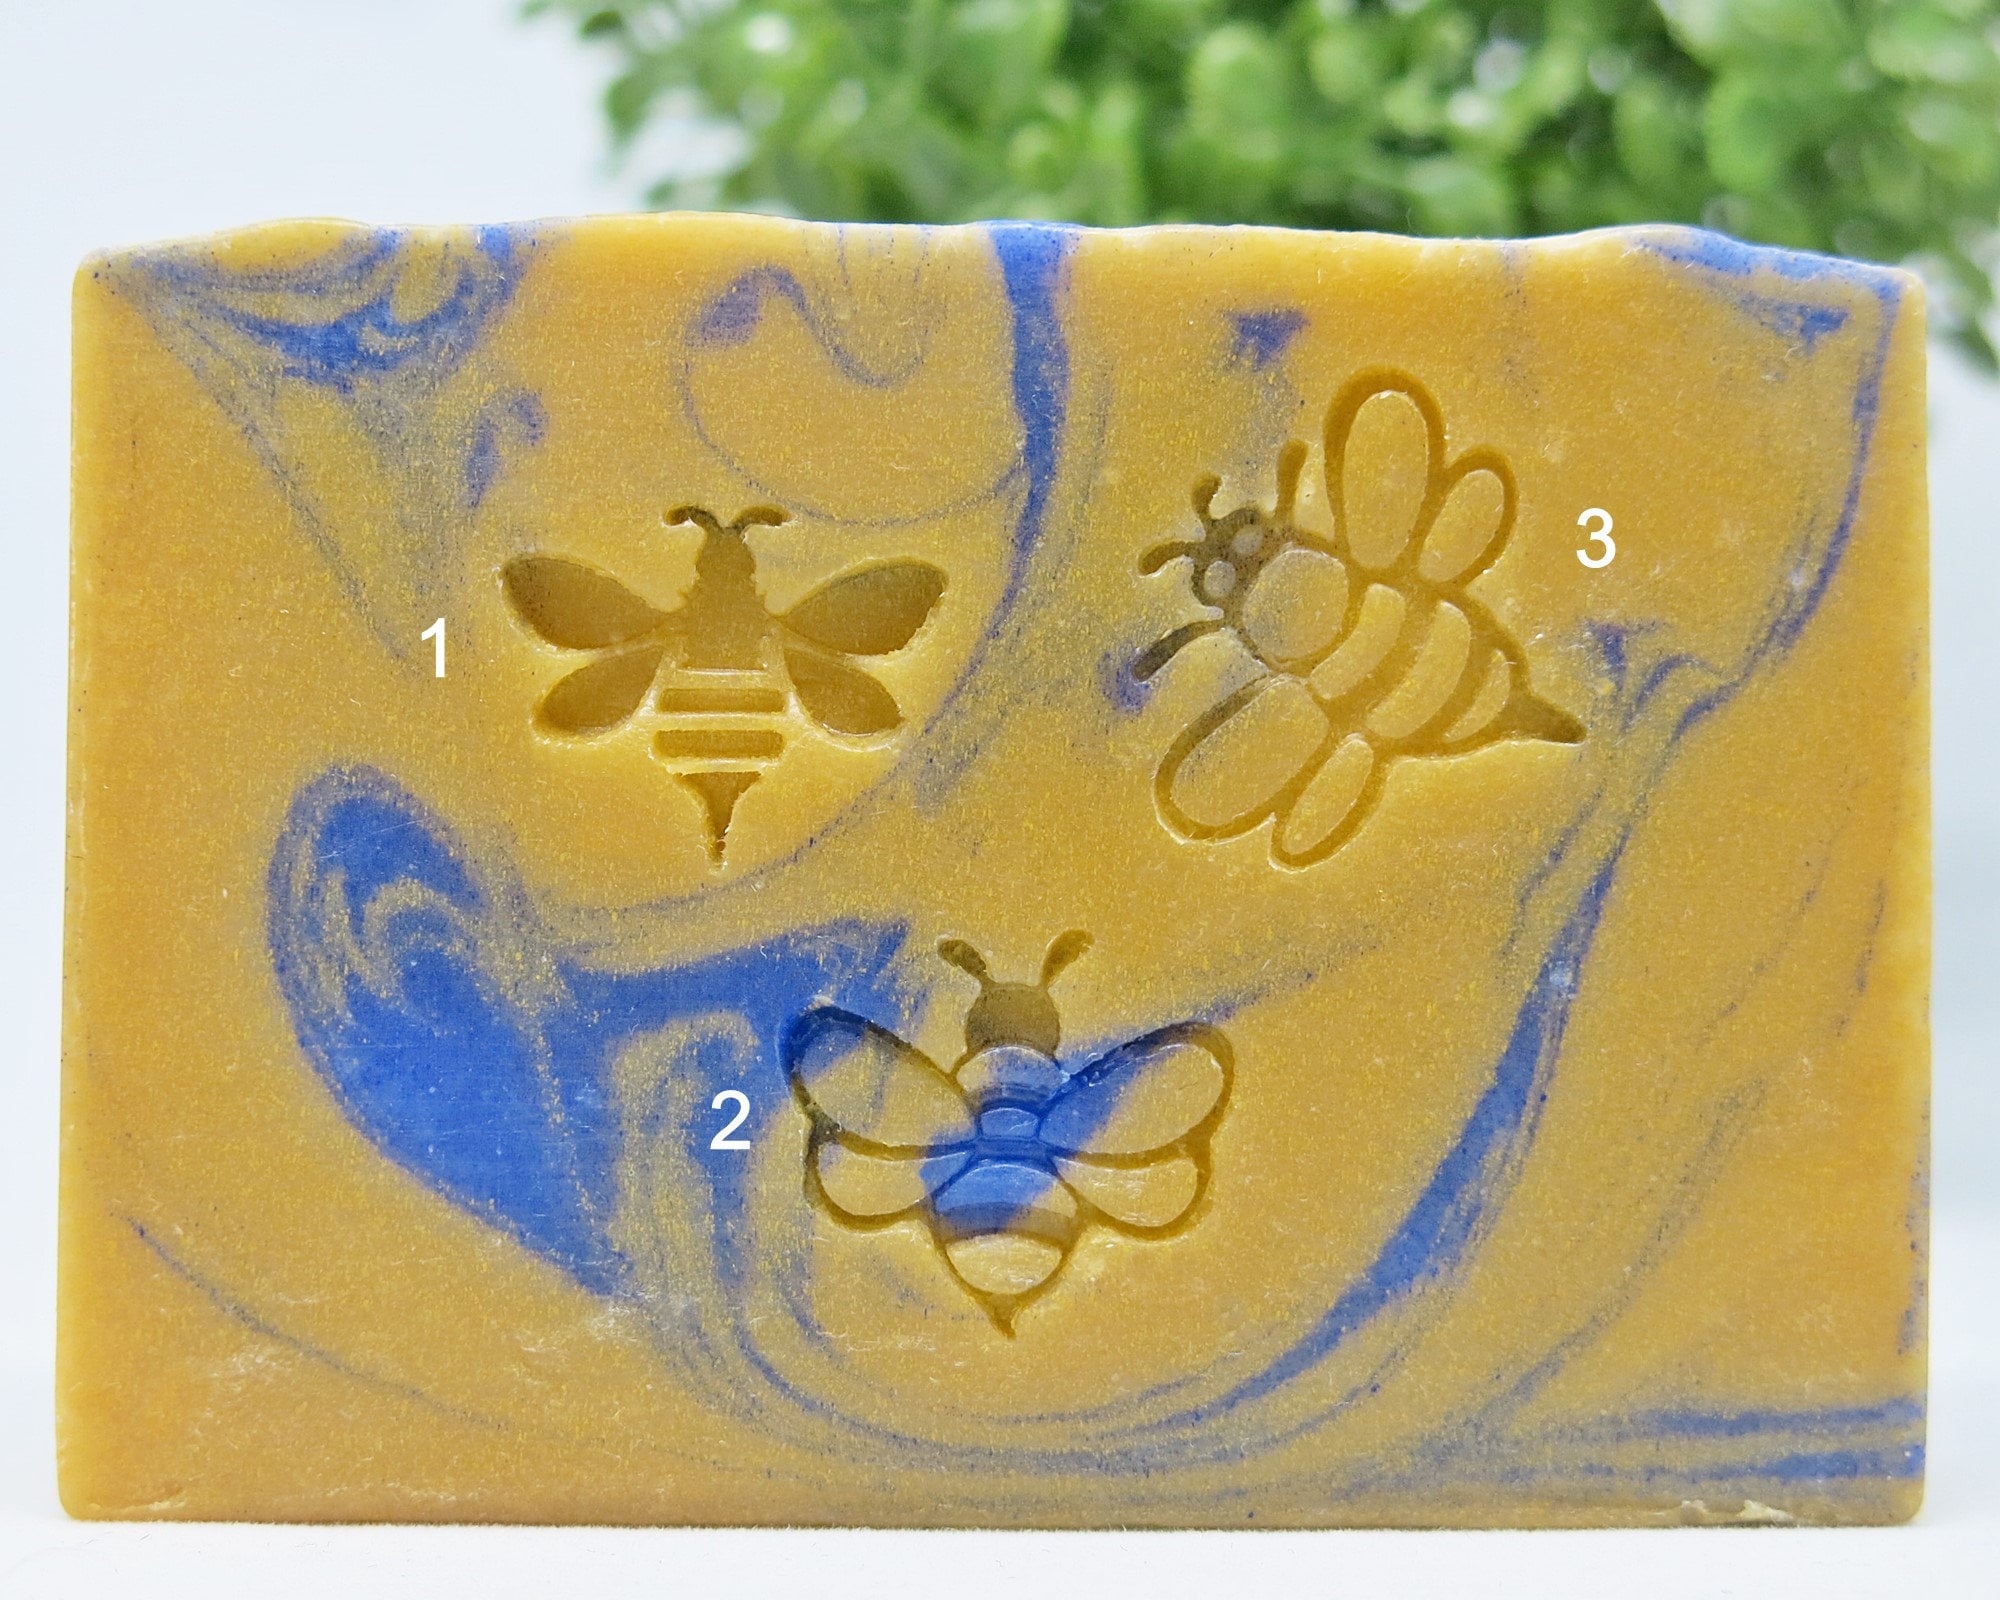 For You With Flowers / Dragonfly and Flowers Acrylic Soap Stamp / Cookie  Stamp / Clay Stamp/fondant Stamp/pottery Stamp 